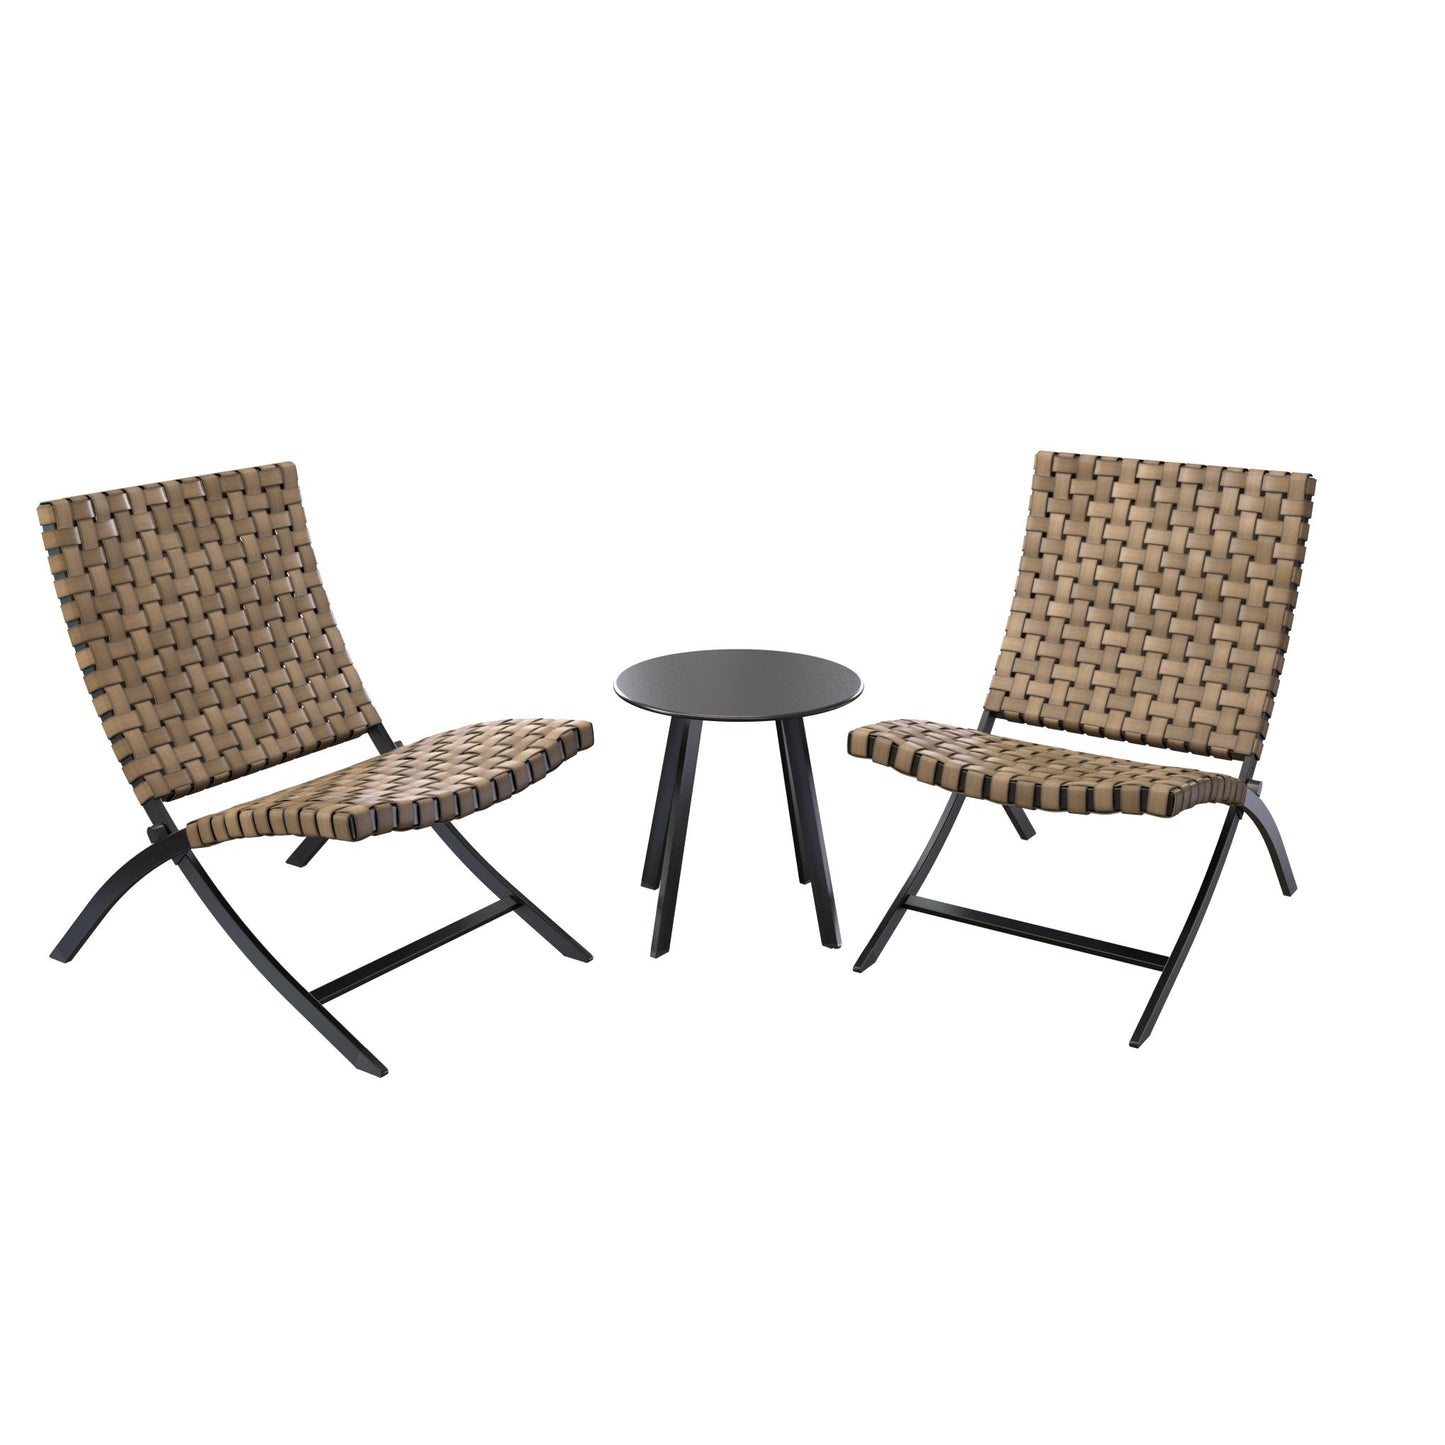 3 Piece Rattan Patio Set Furniture Foldable Wicker Lounger Chairs and Coffee Table Set